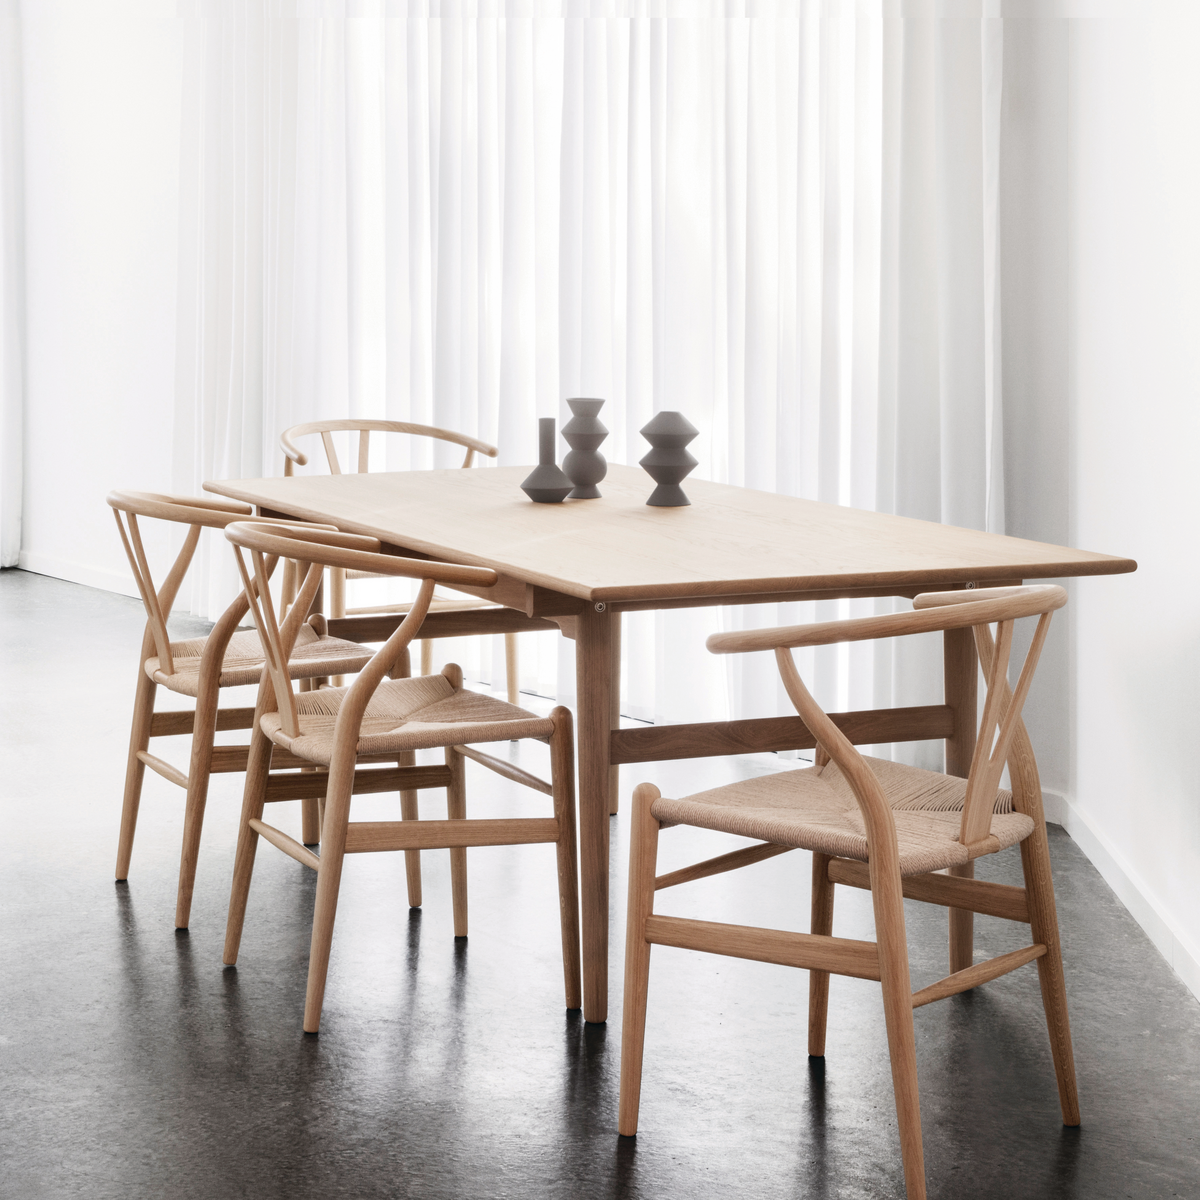 Natural wood dining set against white curtains